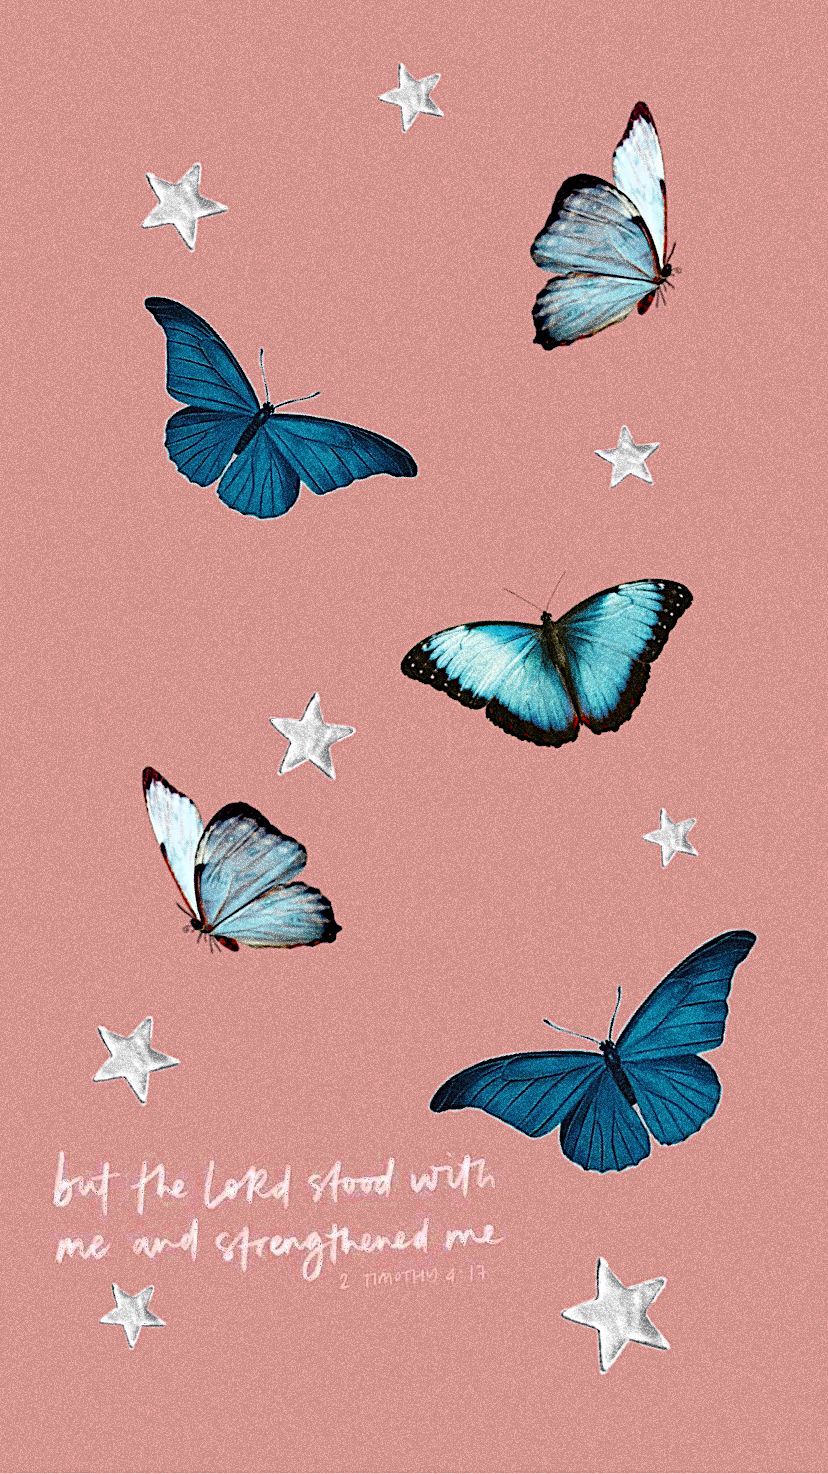 Cute Aesthetic Pink ButterflyWallpapers